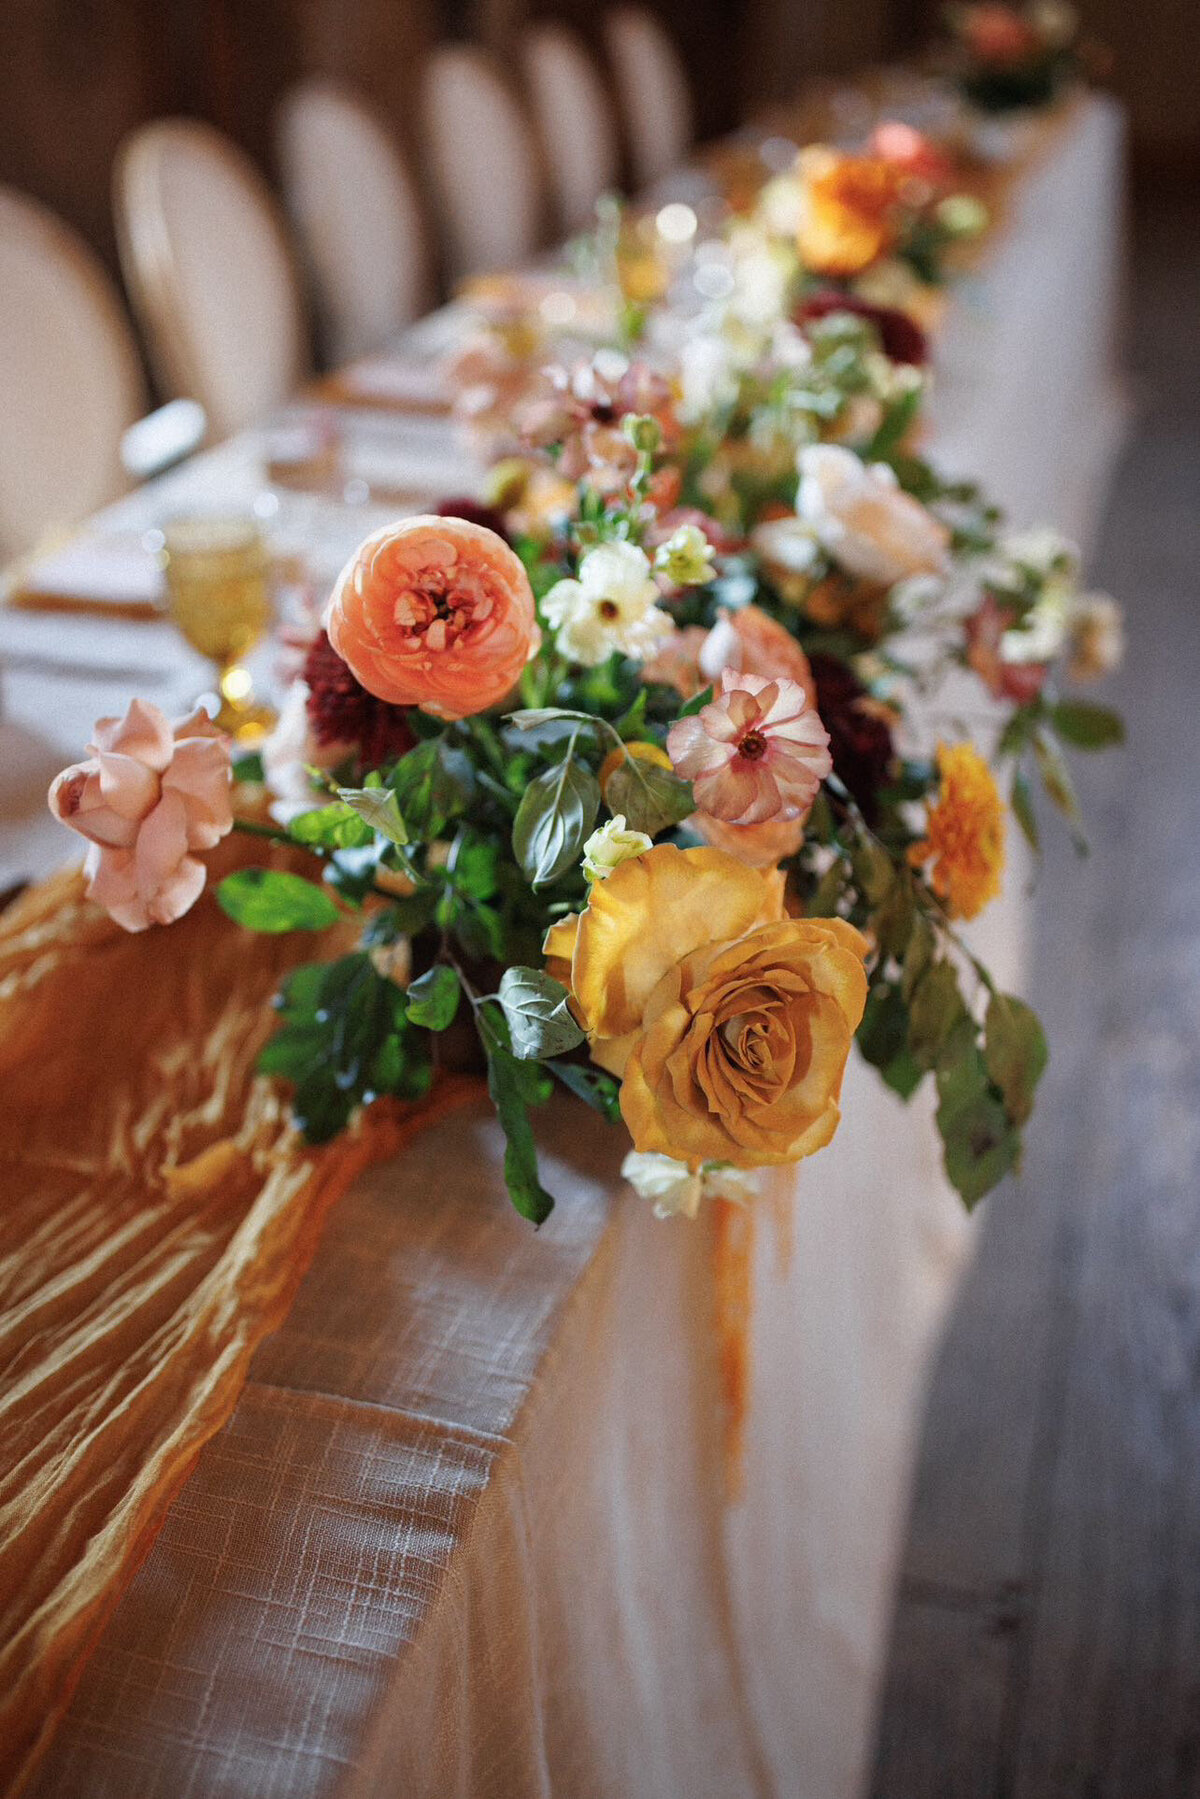 A loose centrepiece made with mustard and peach flowers sits at the edge of a long head table with a mustard yellow cheesecloth runner in the barn venue Evermore in Almonte Ontario